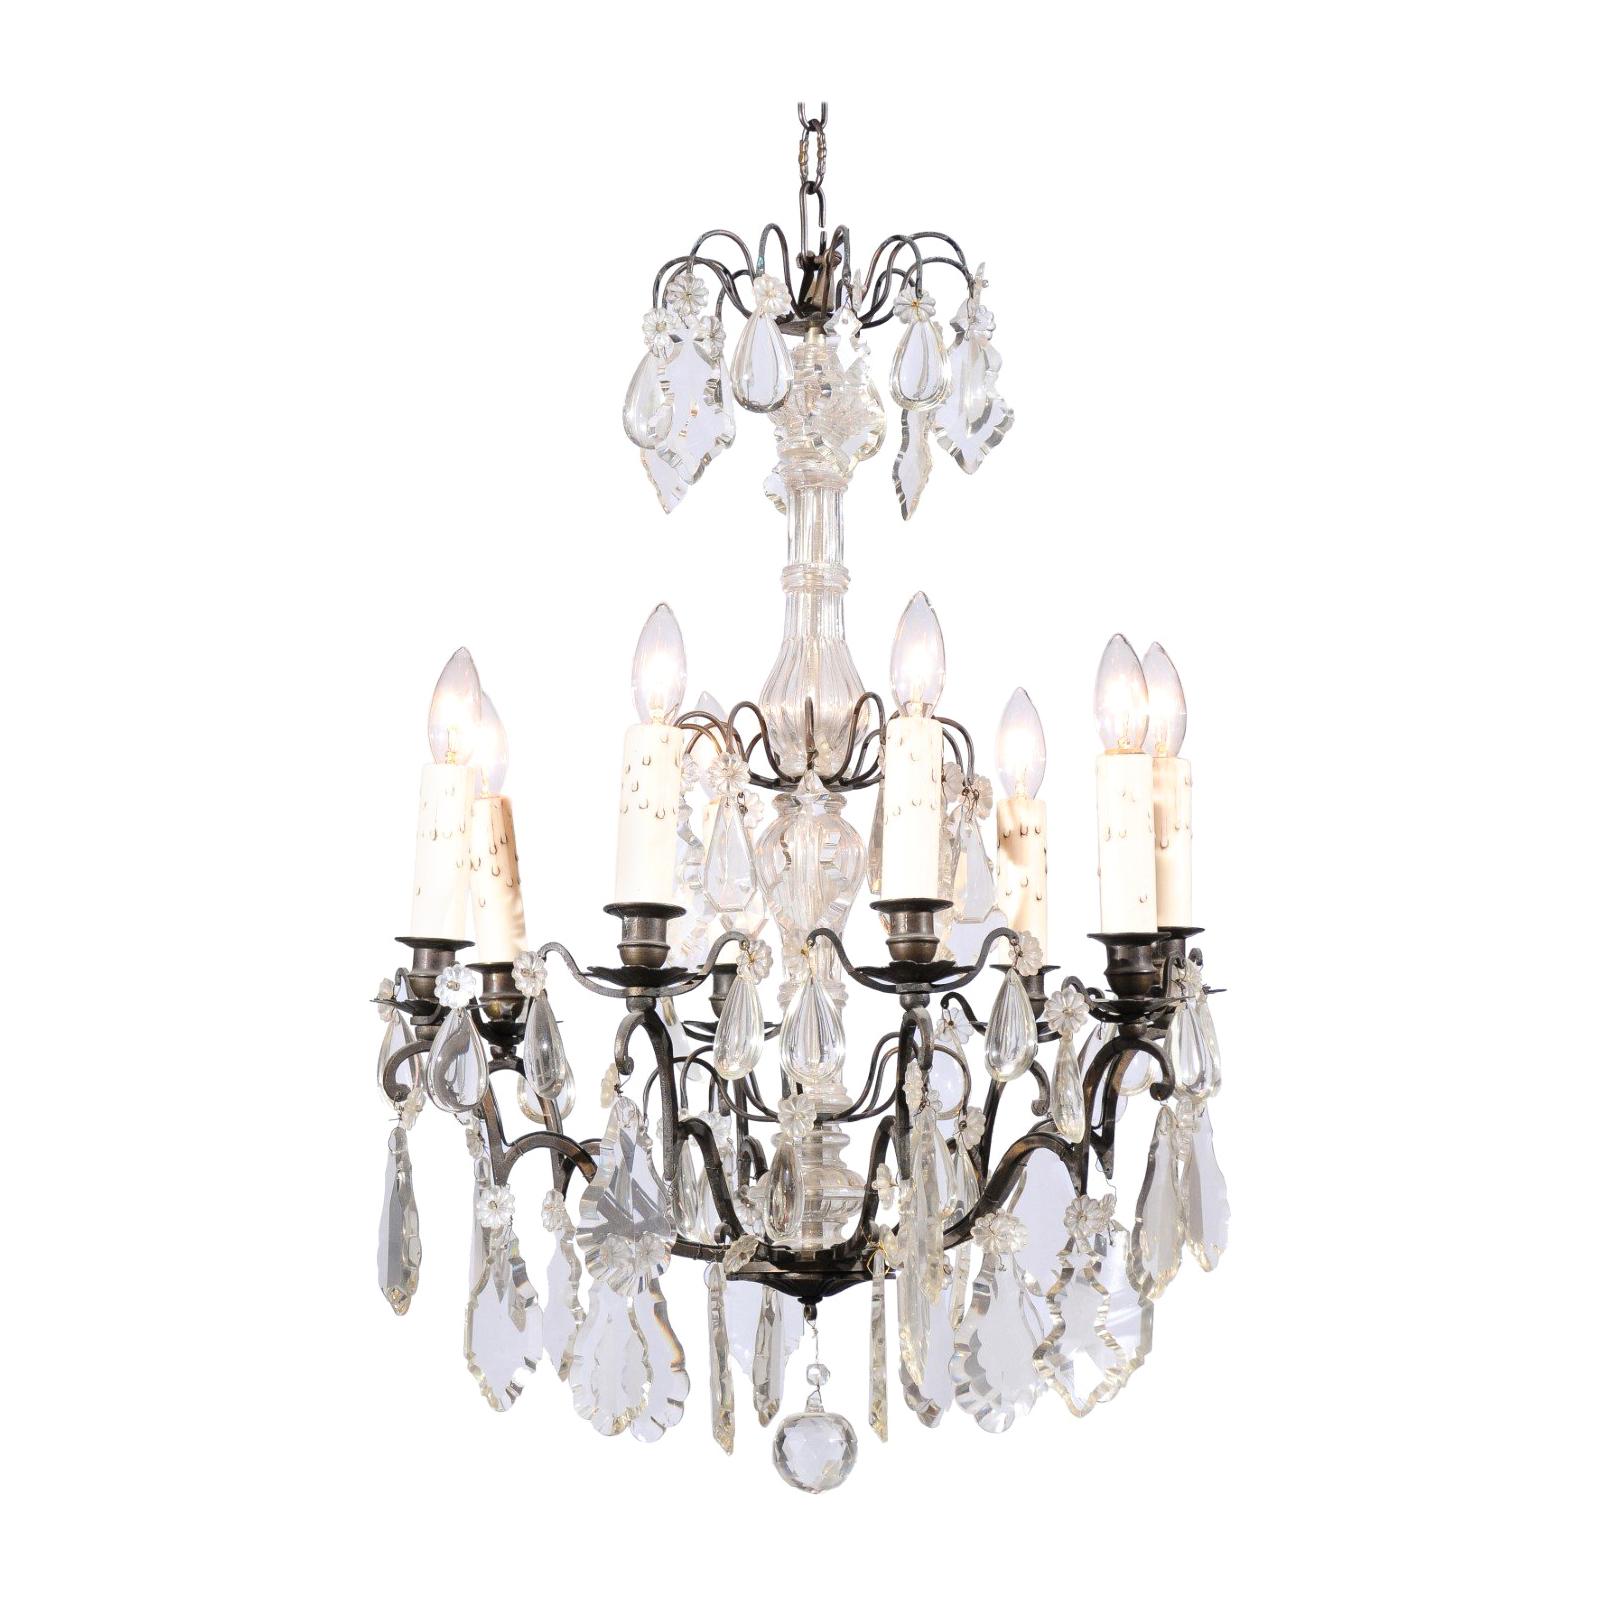 French Late 19th Century Eight-Arm Crystal Chandelier with Dark Metal Armature For Sale